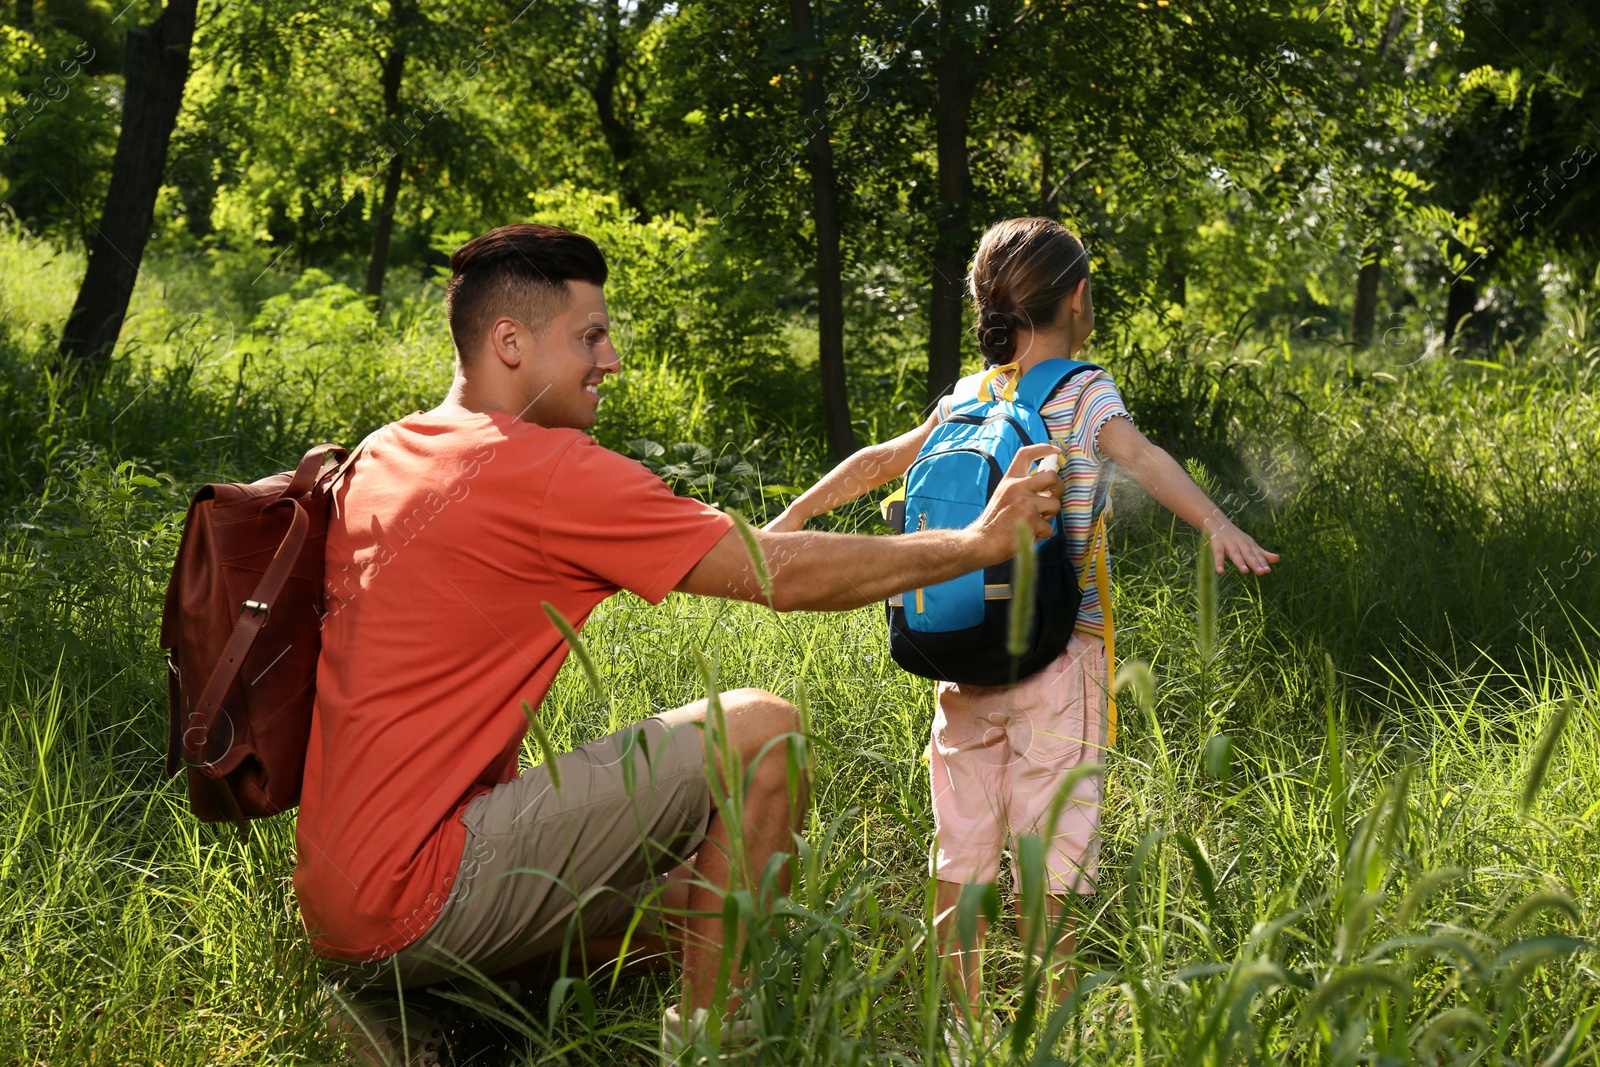 Photo of Father spraying tick repellent on his little daughter's arm during hike in nature